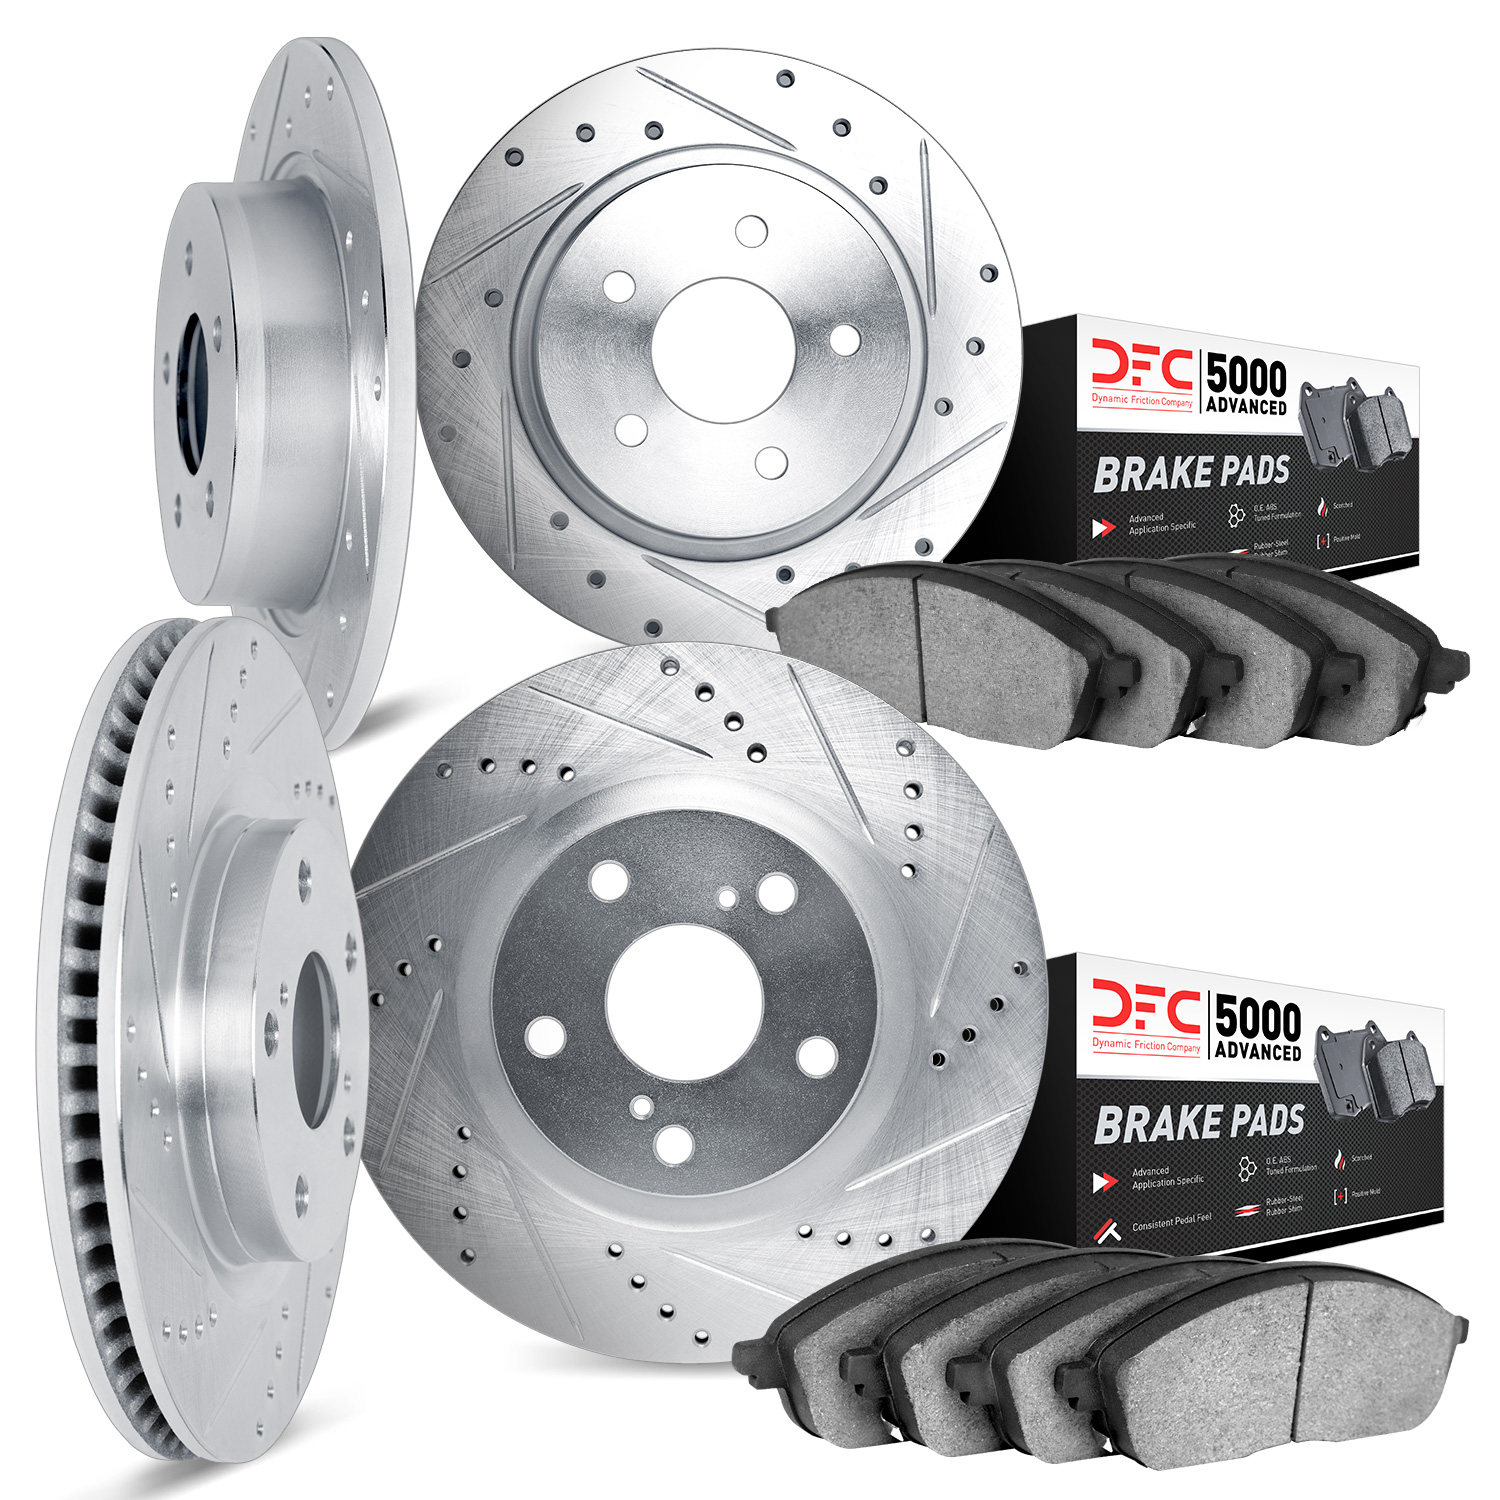 7504-58007 Drilled/Slotted Brake Rotors w/5000 Advanced Brake Pads Kit [Silver], 2017-2020 Acura/Honda, Position: Front and Rear